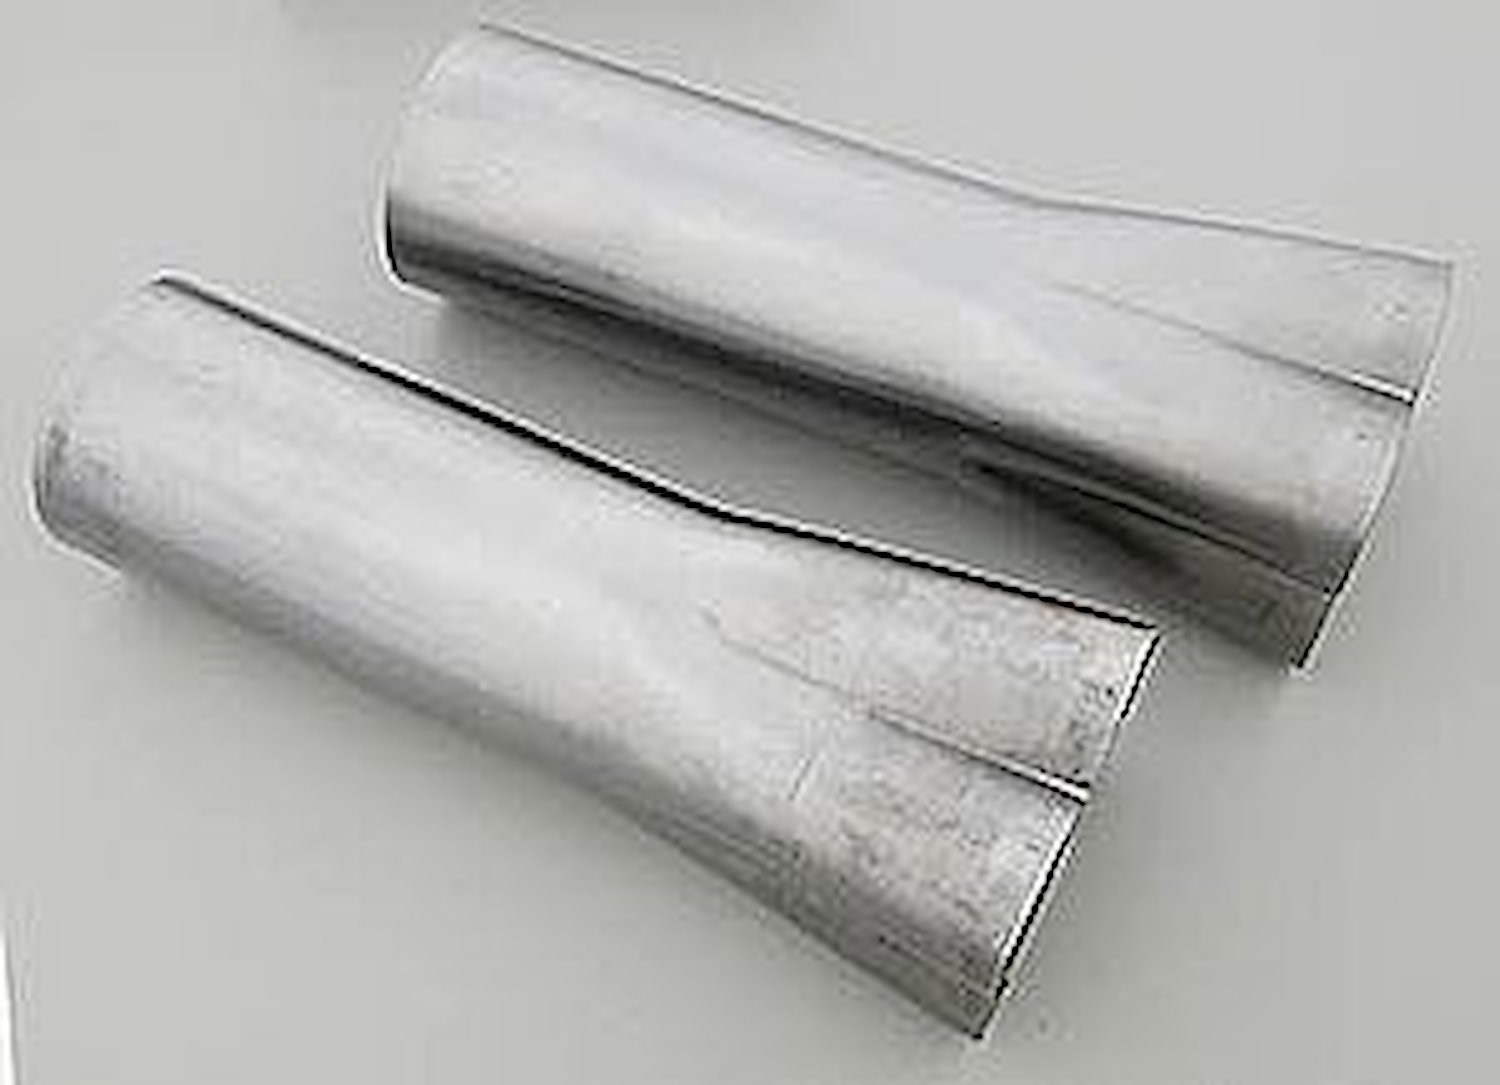 Weld-On Collectors Tube Size: 1-3/4"